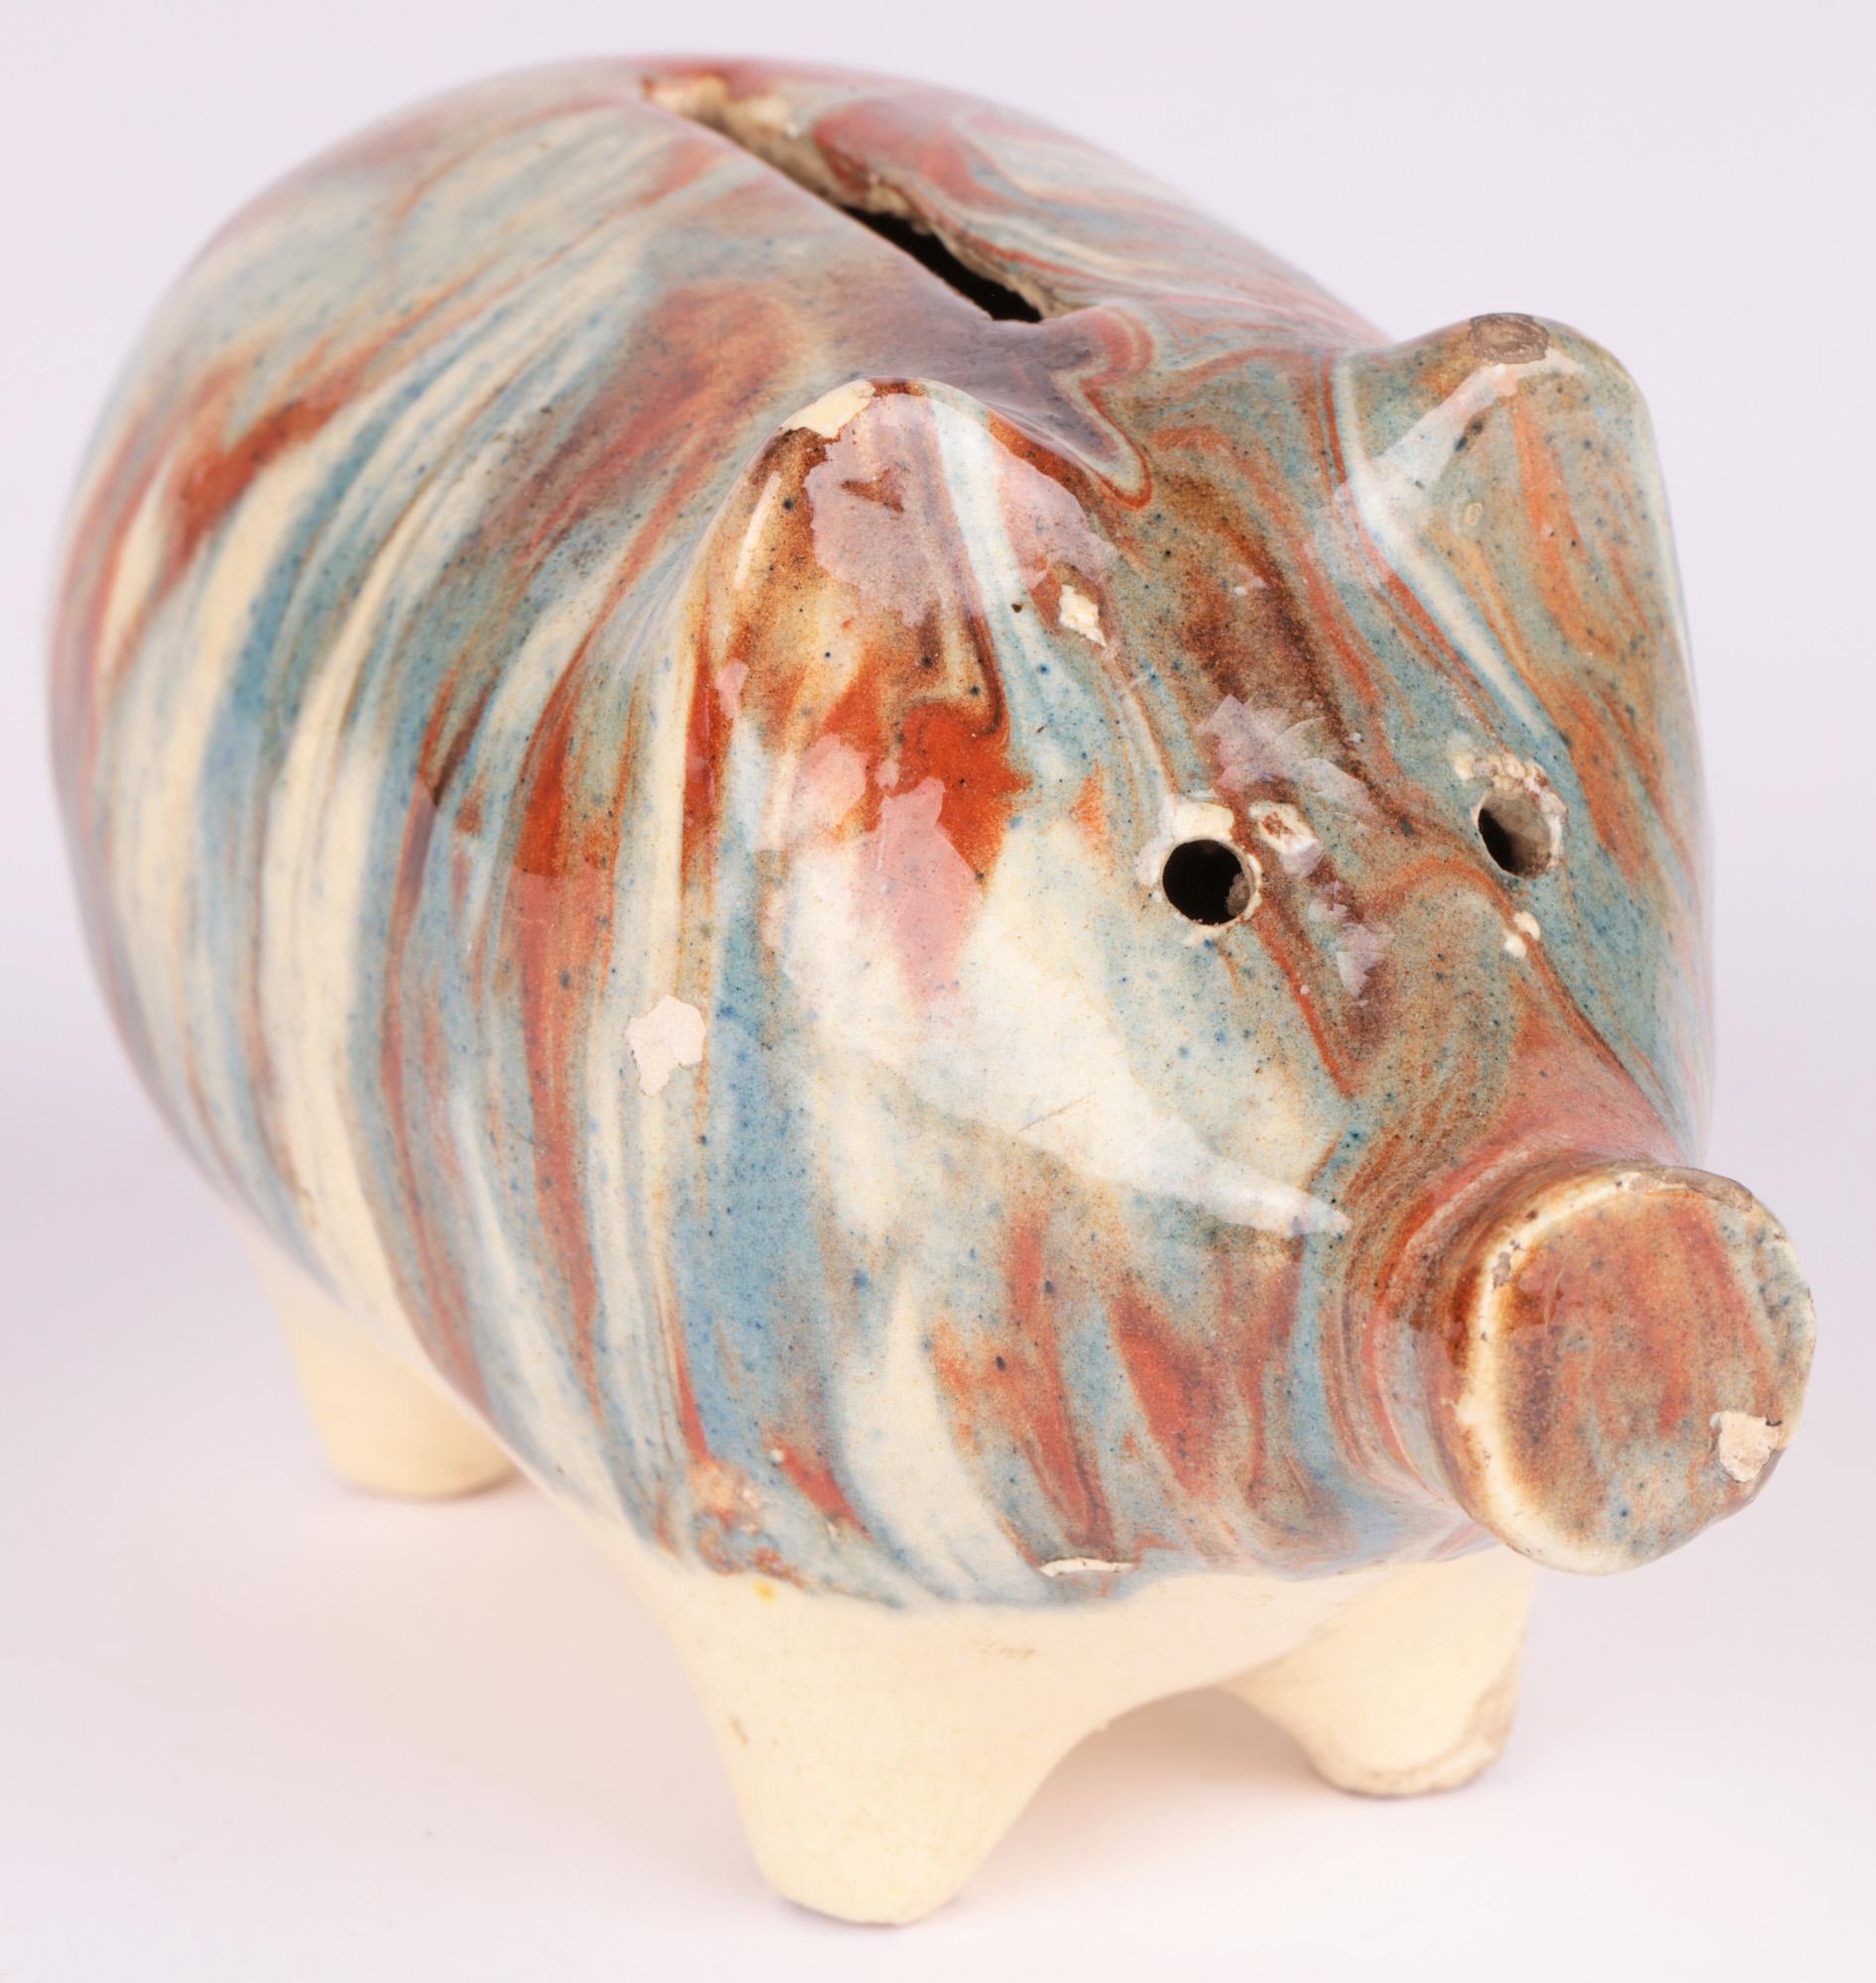 A delightful antique English Staffordshire pottery pig moneybox decorated in marble effect slipware glazes and dating from around 1840. The moneybox shaped as a standing pig stands on four short stump legs with a large pig shaped body with molded